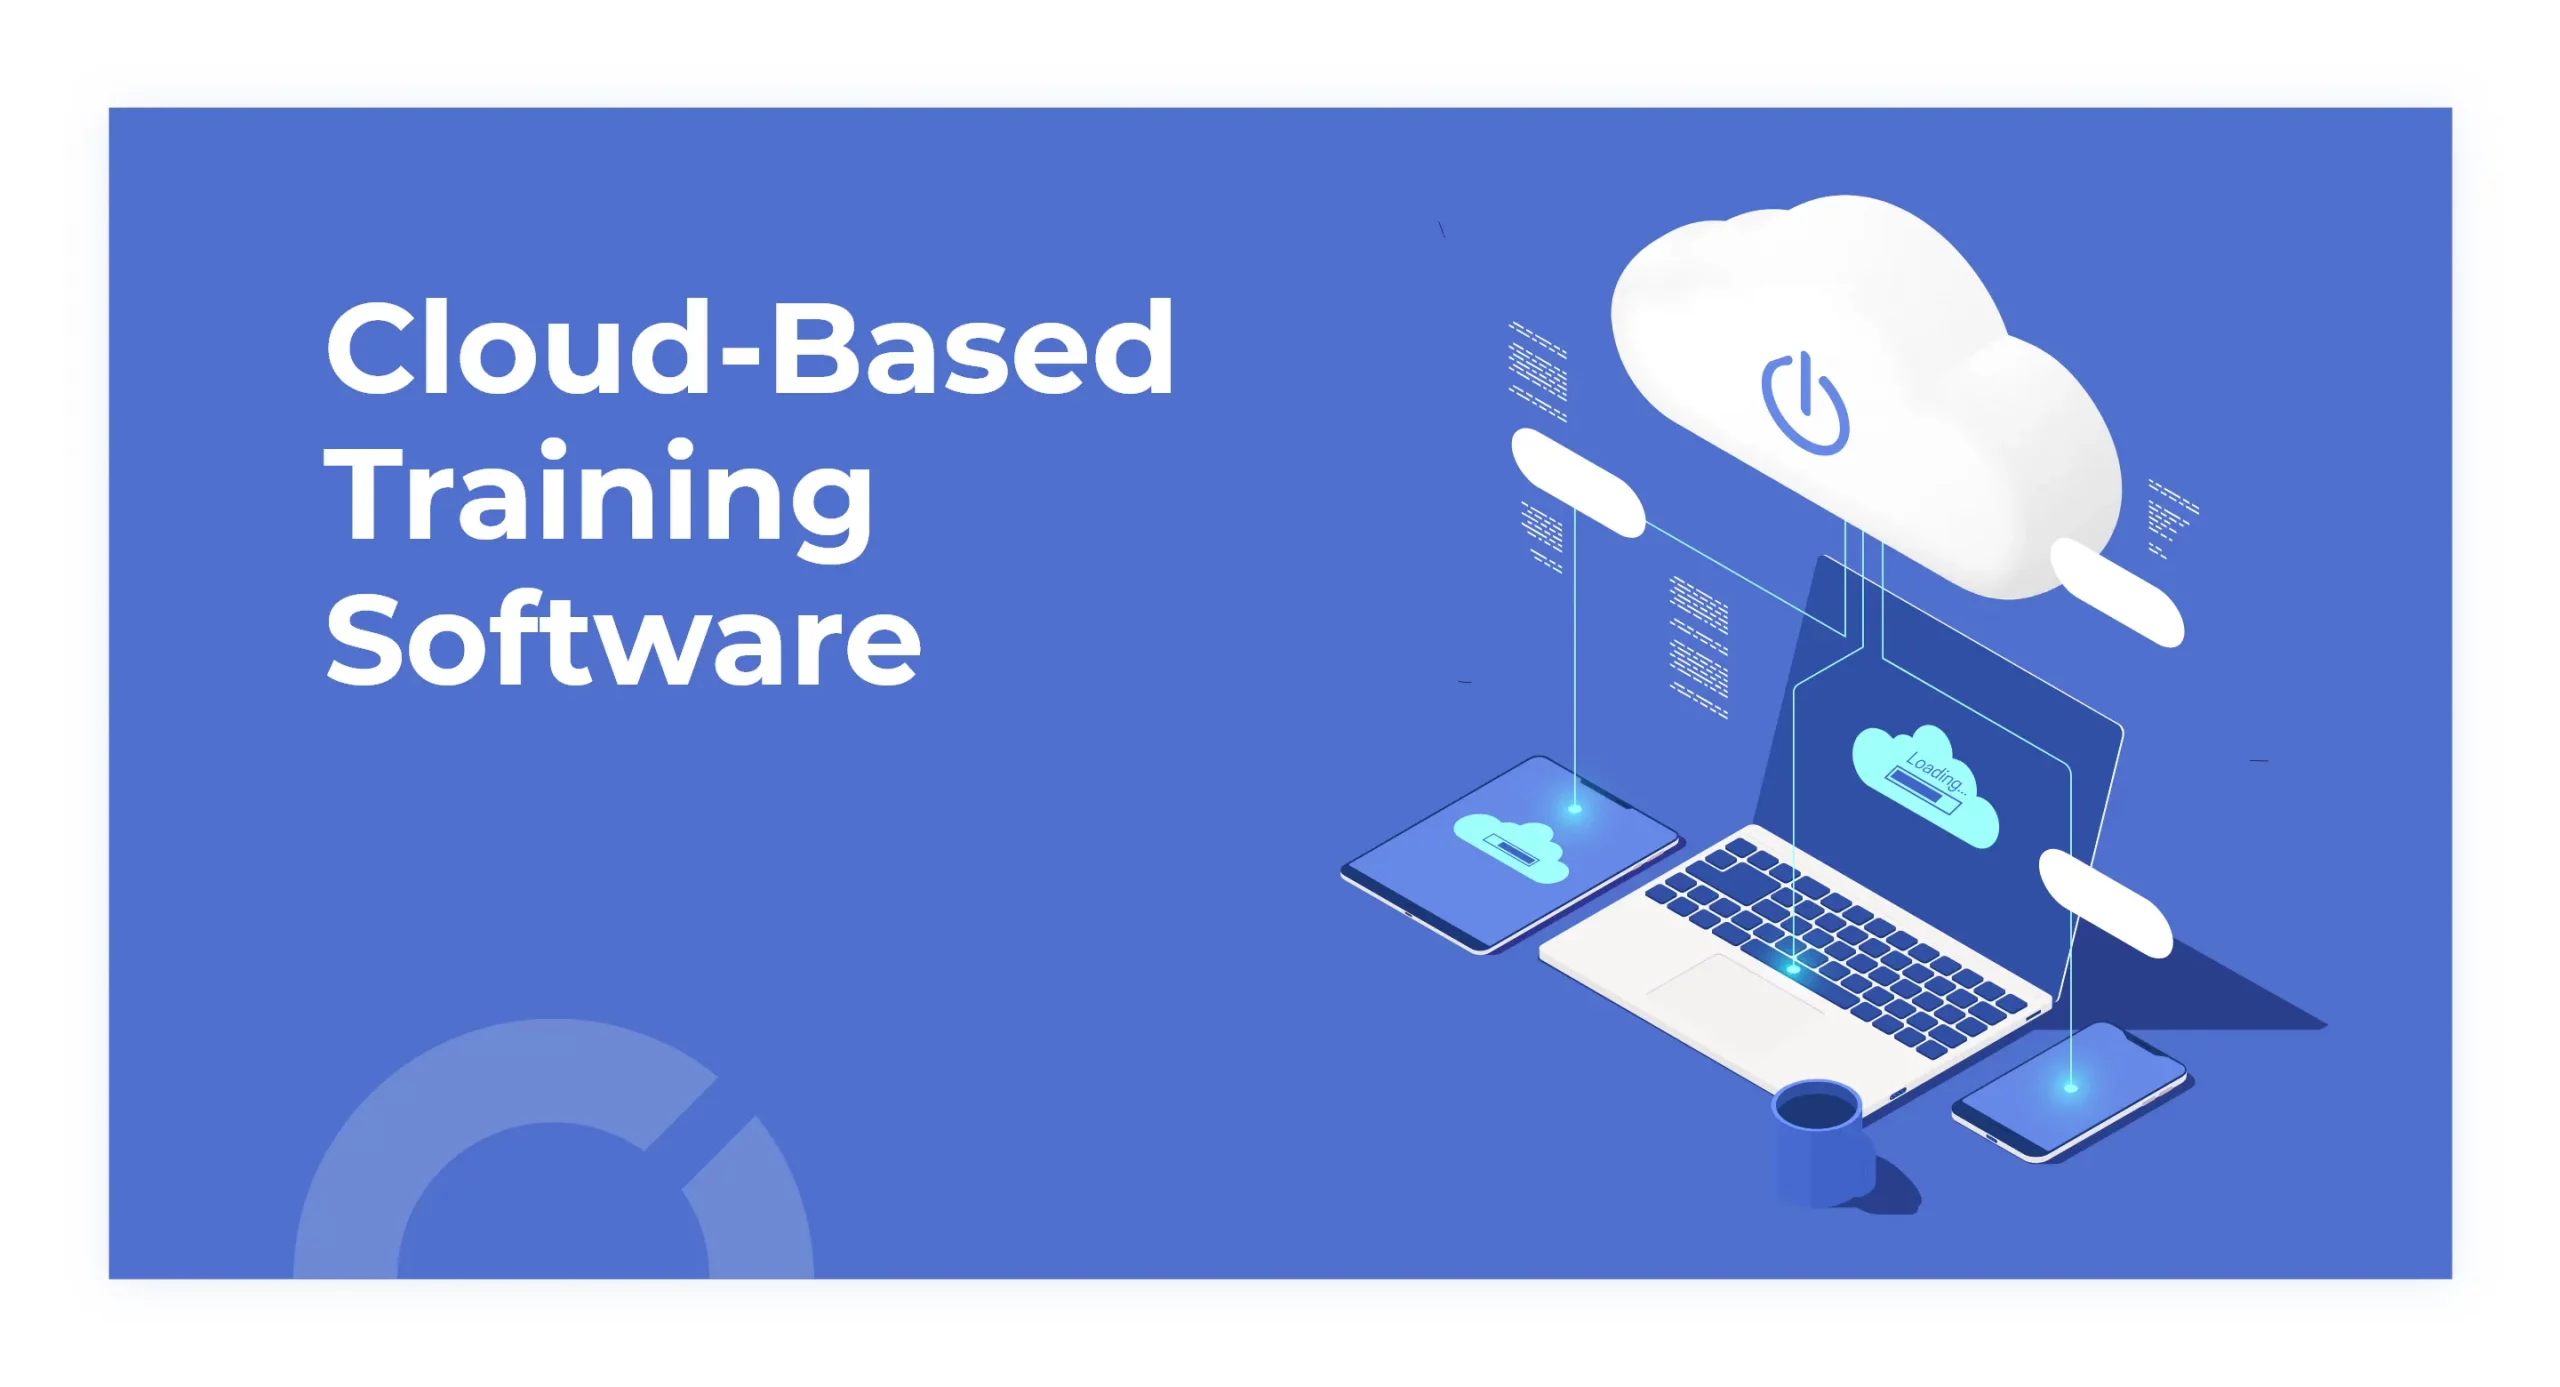 Cloud-Based Training Software